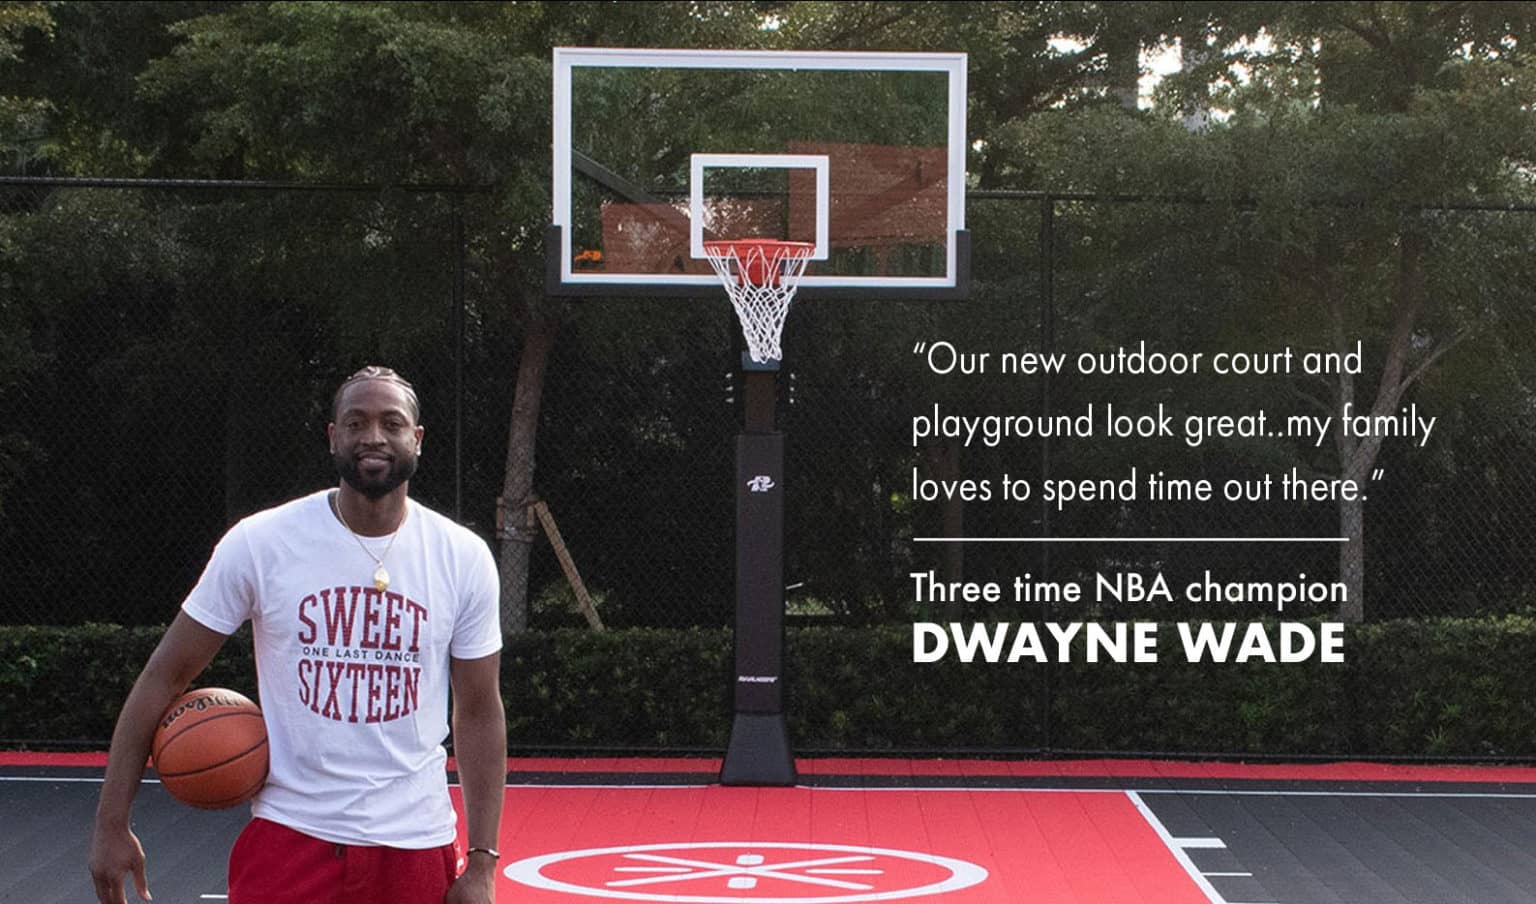 The NBA Basketball Hoop: The Official Height and NBA Rim Size